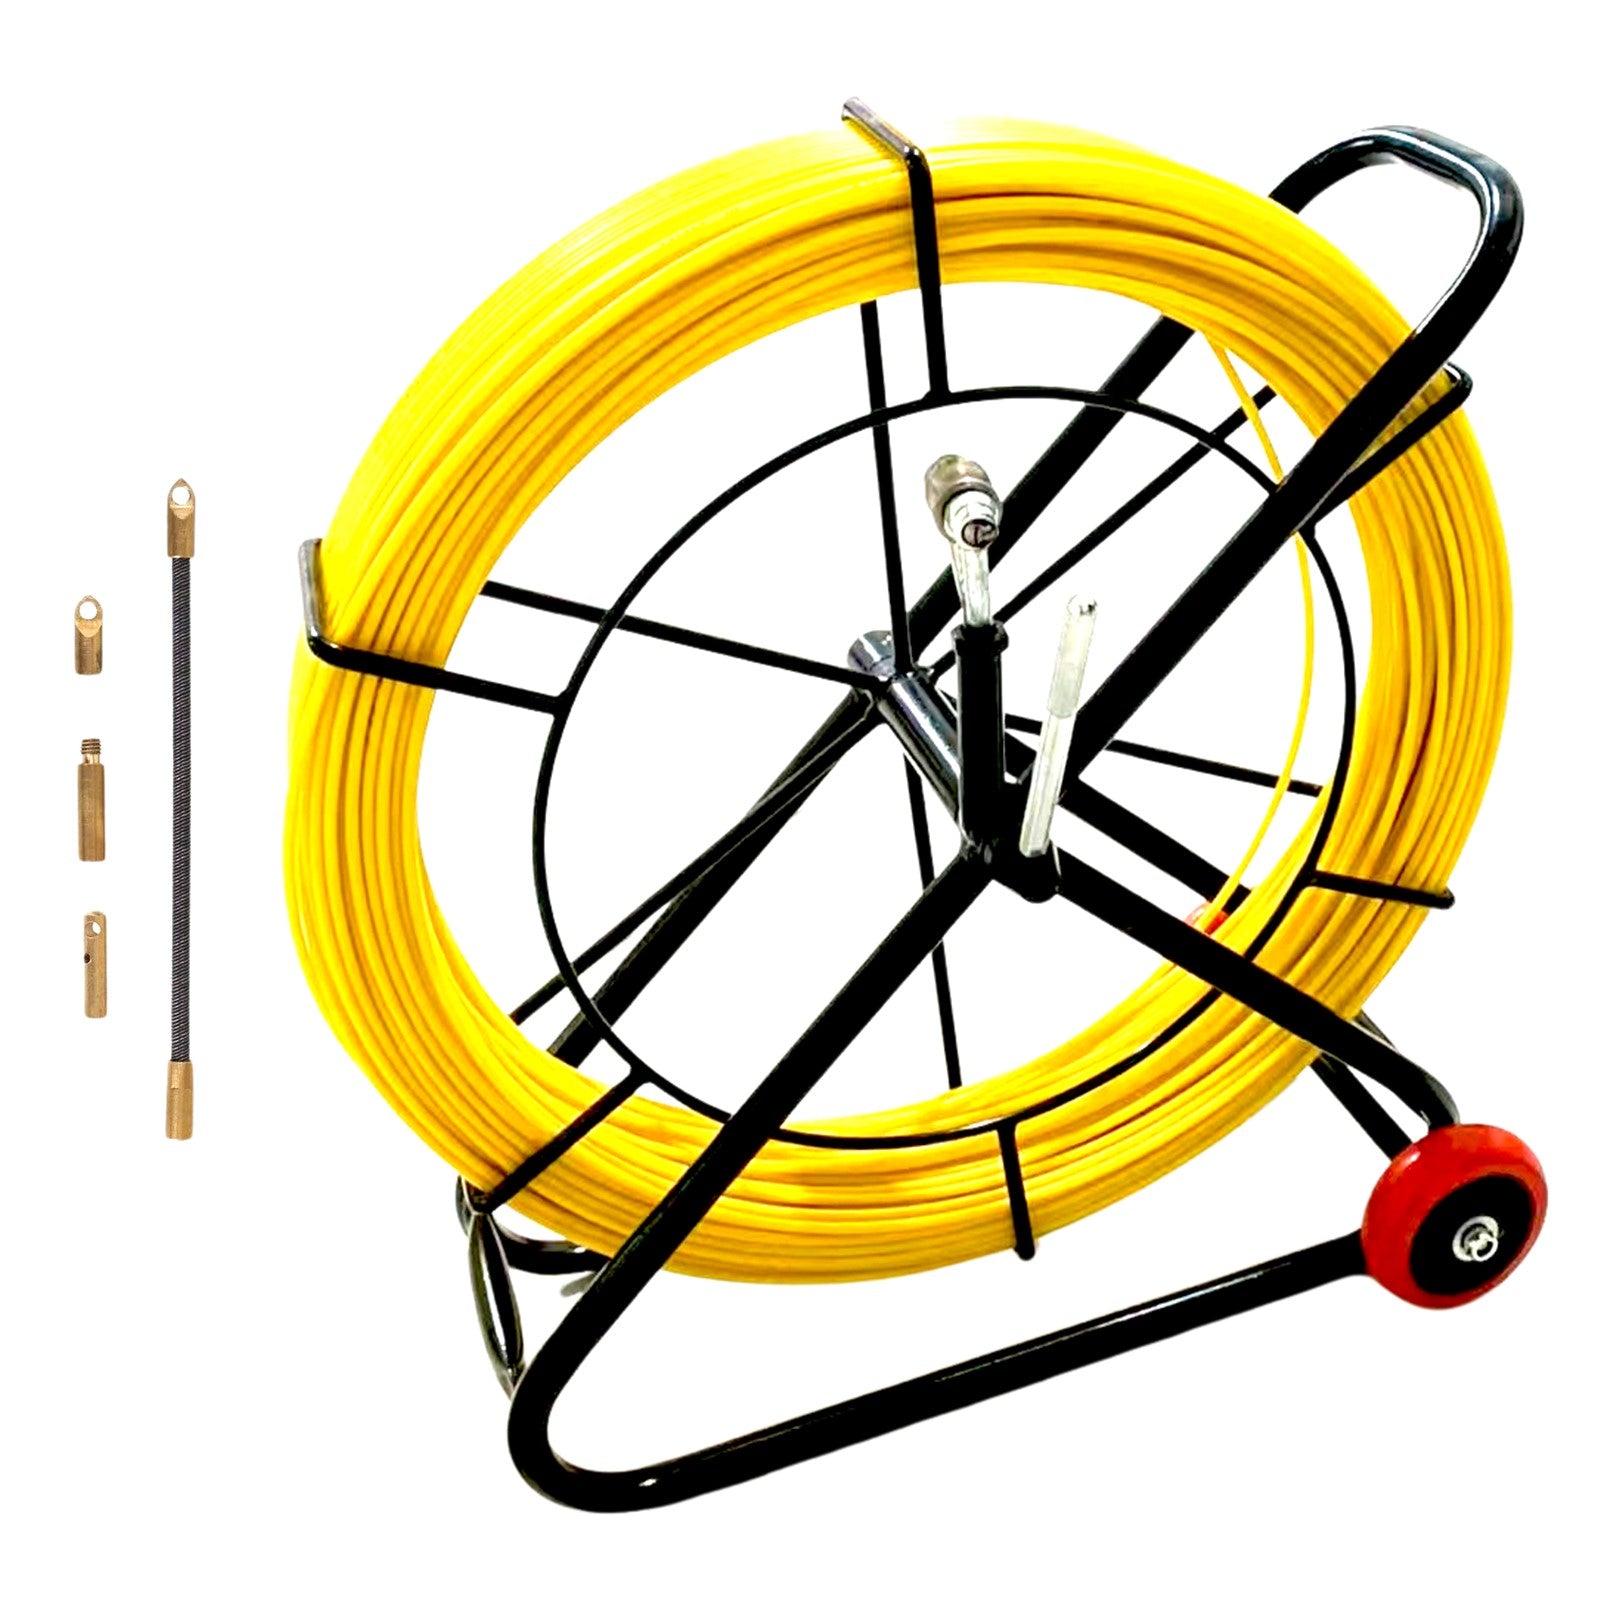 85m x 4.5mm Fibreglass Duct Rodder Cable with Wheeled Steel Frame